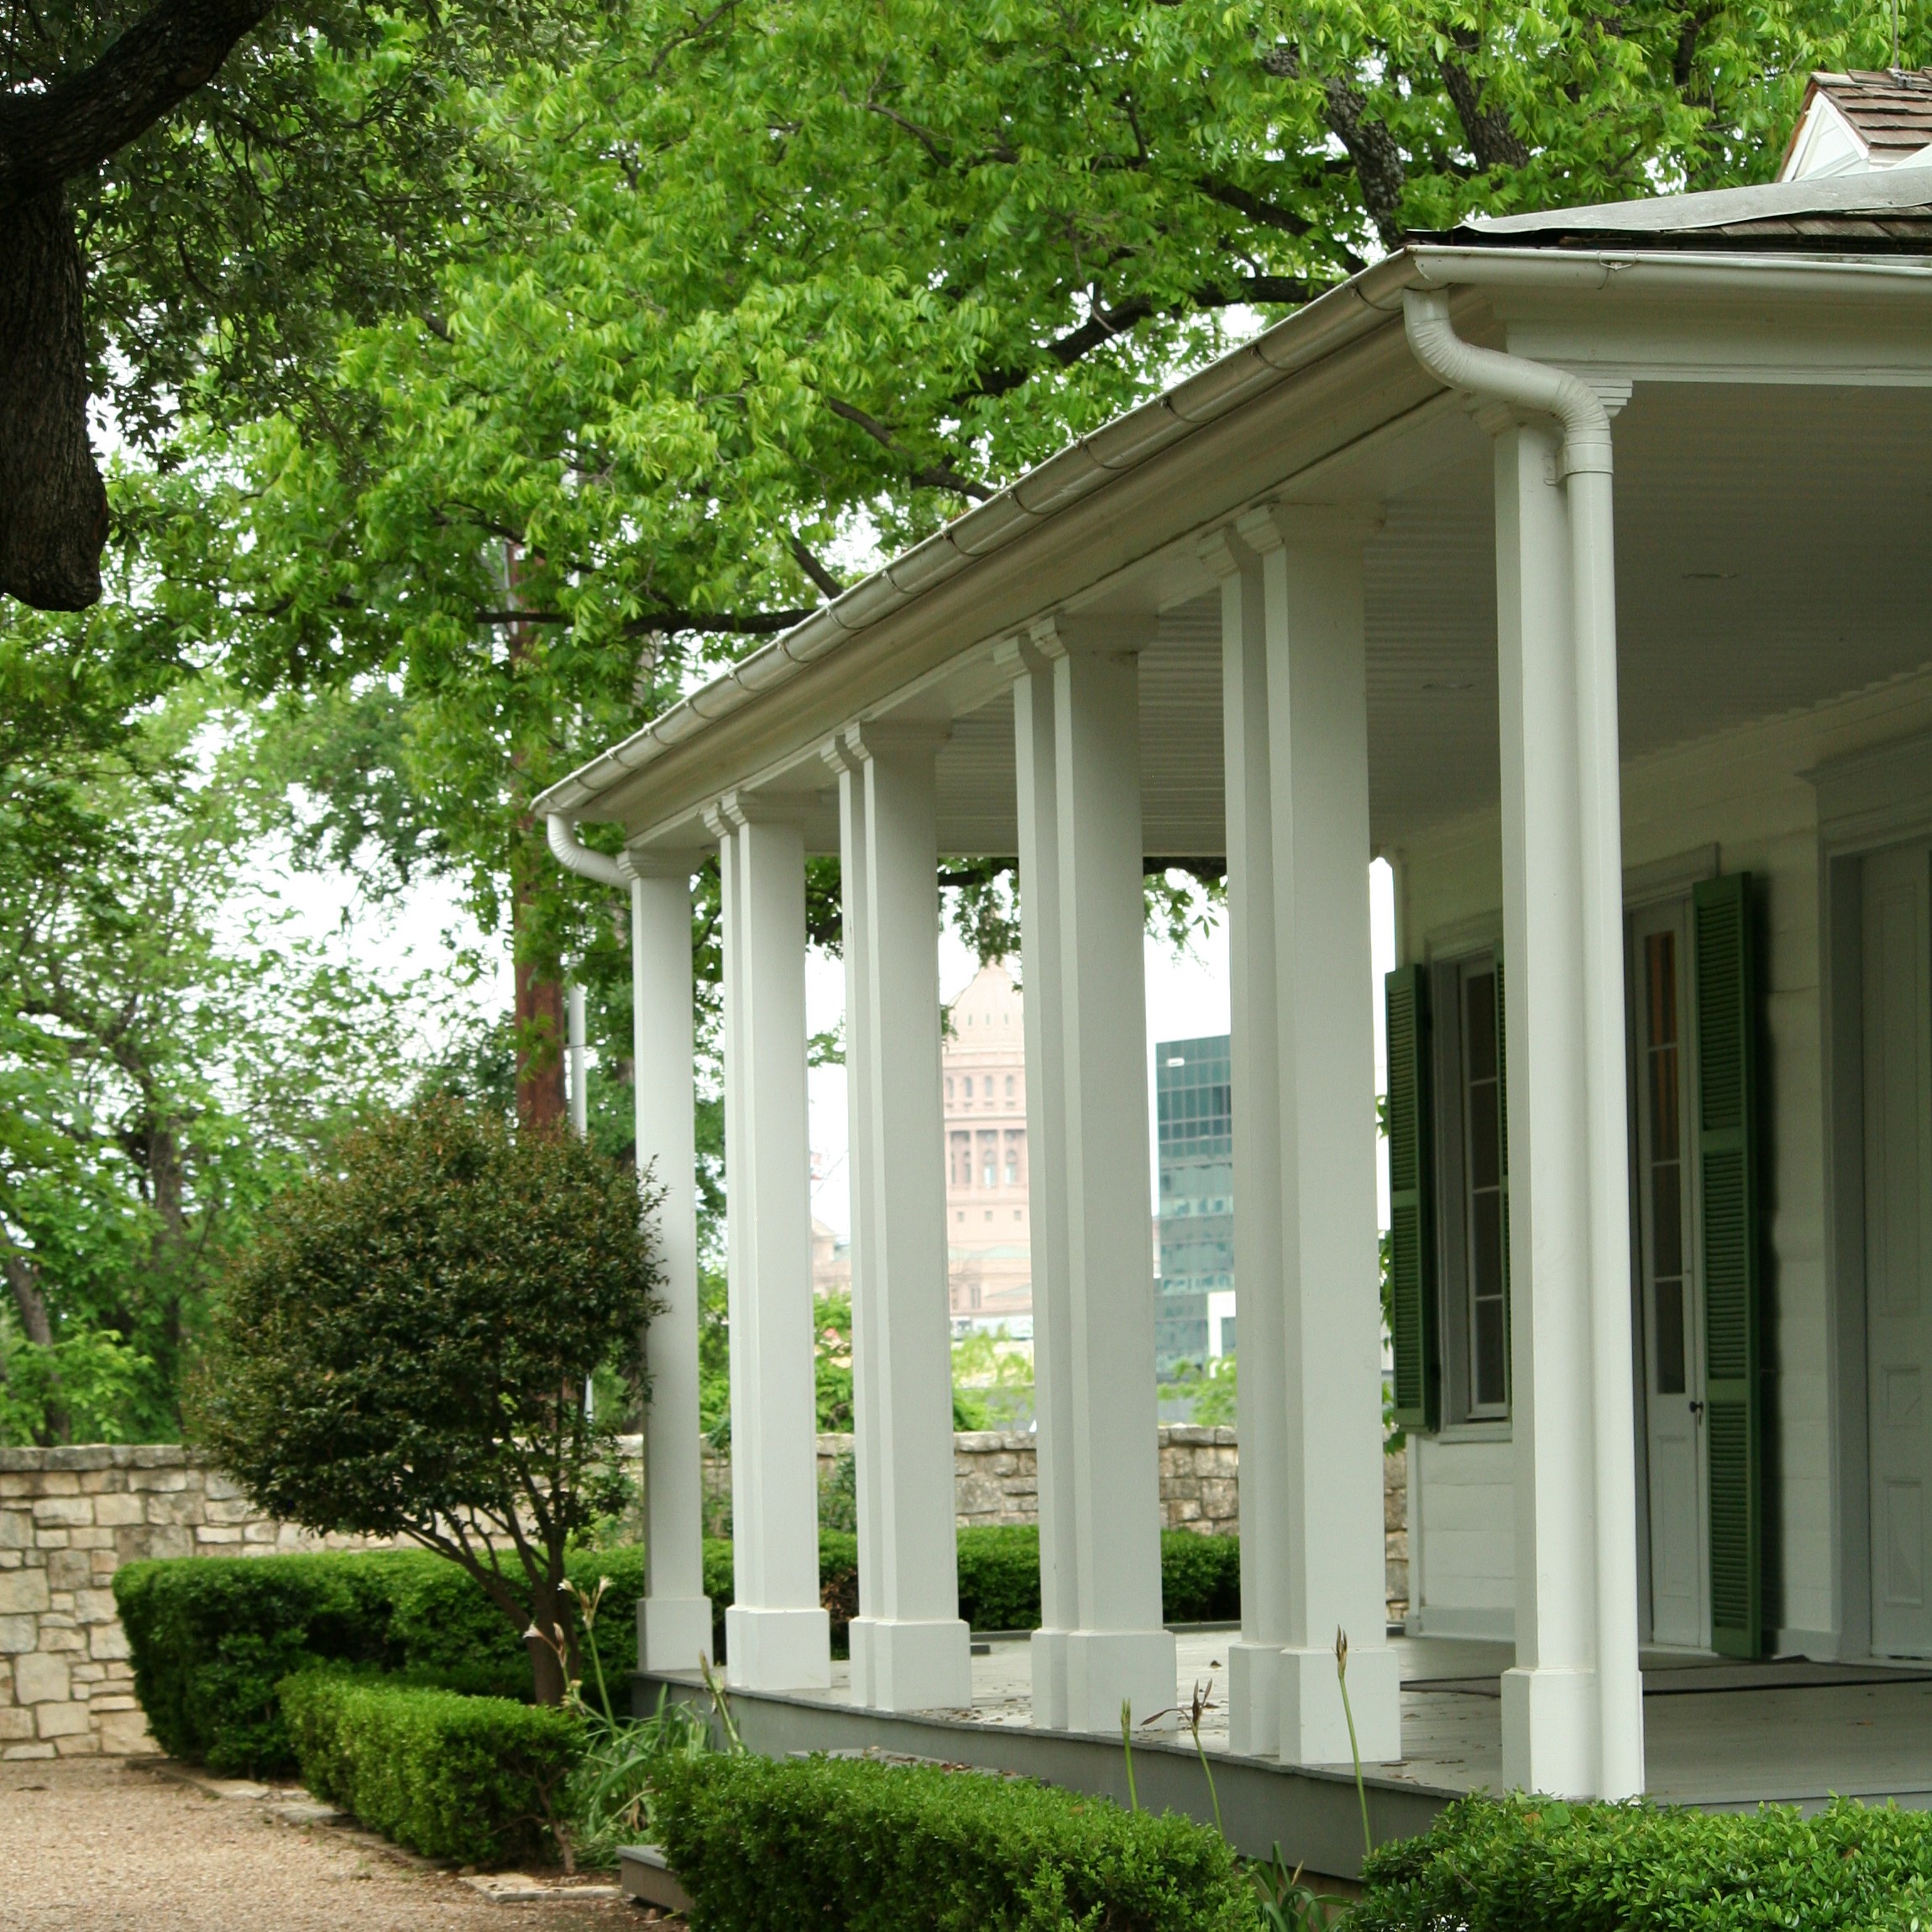 Corner view of the white columns at the French Legation with trees in the background